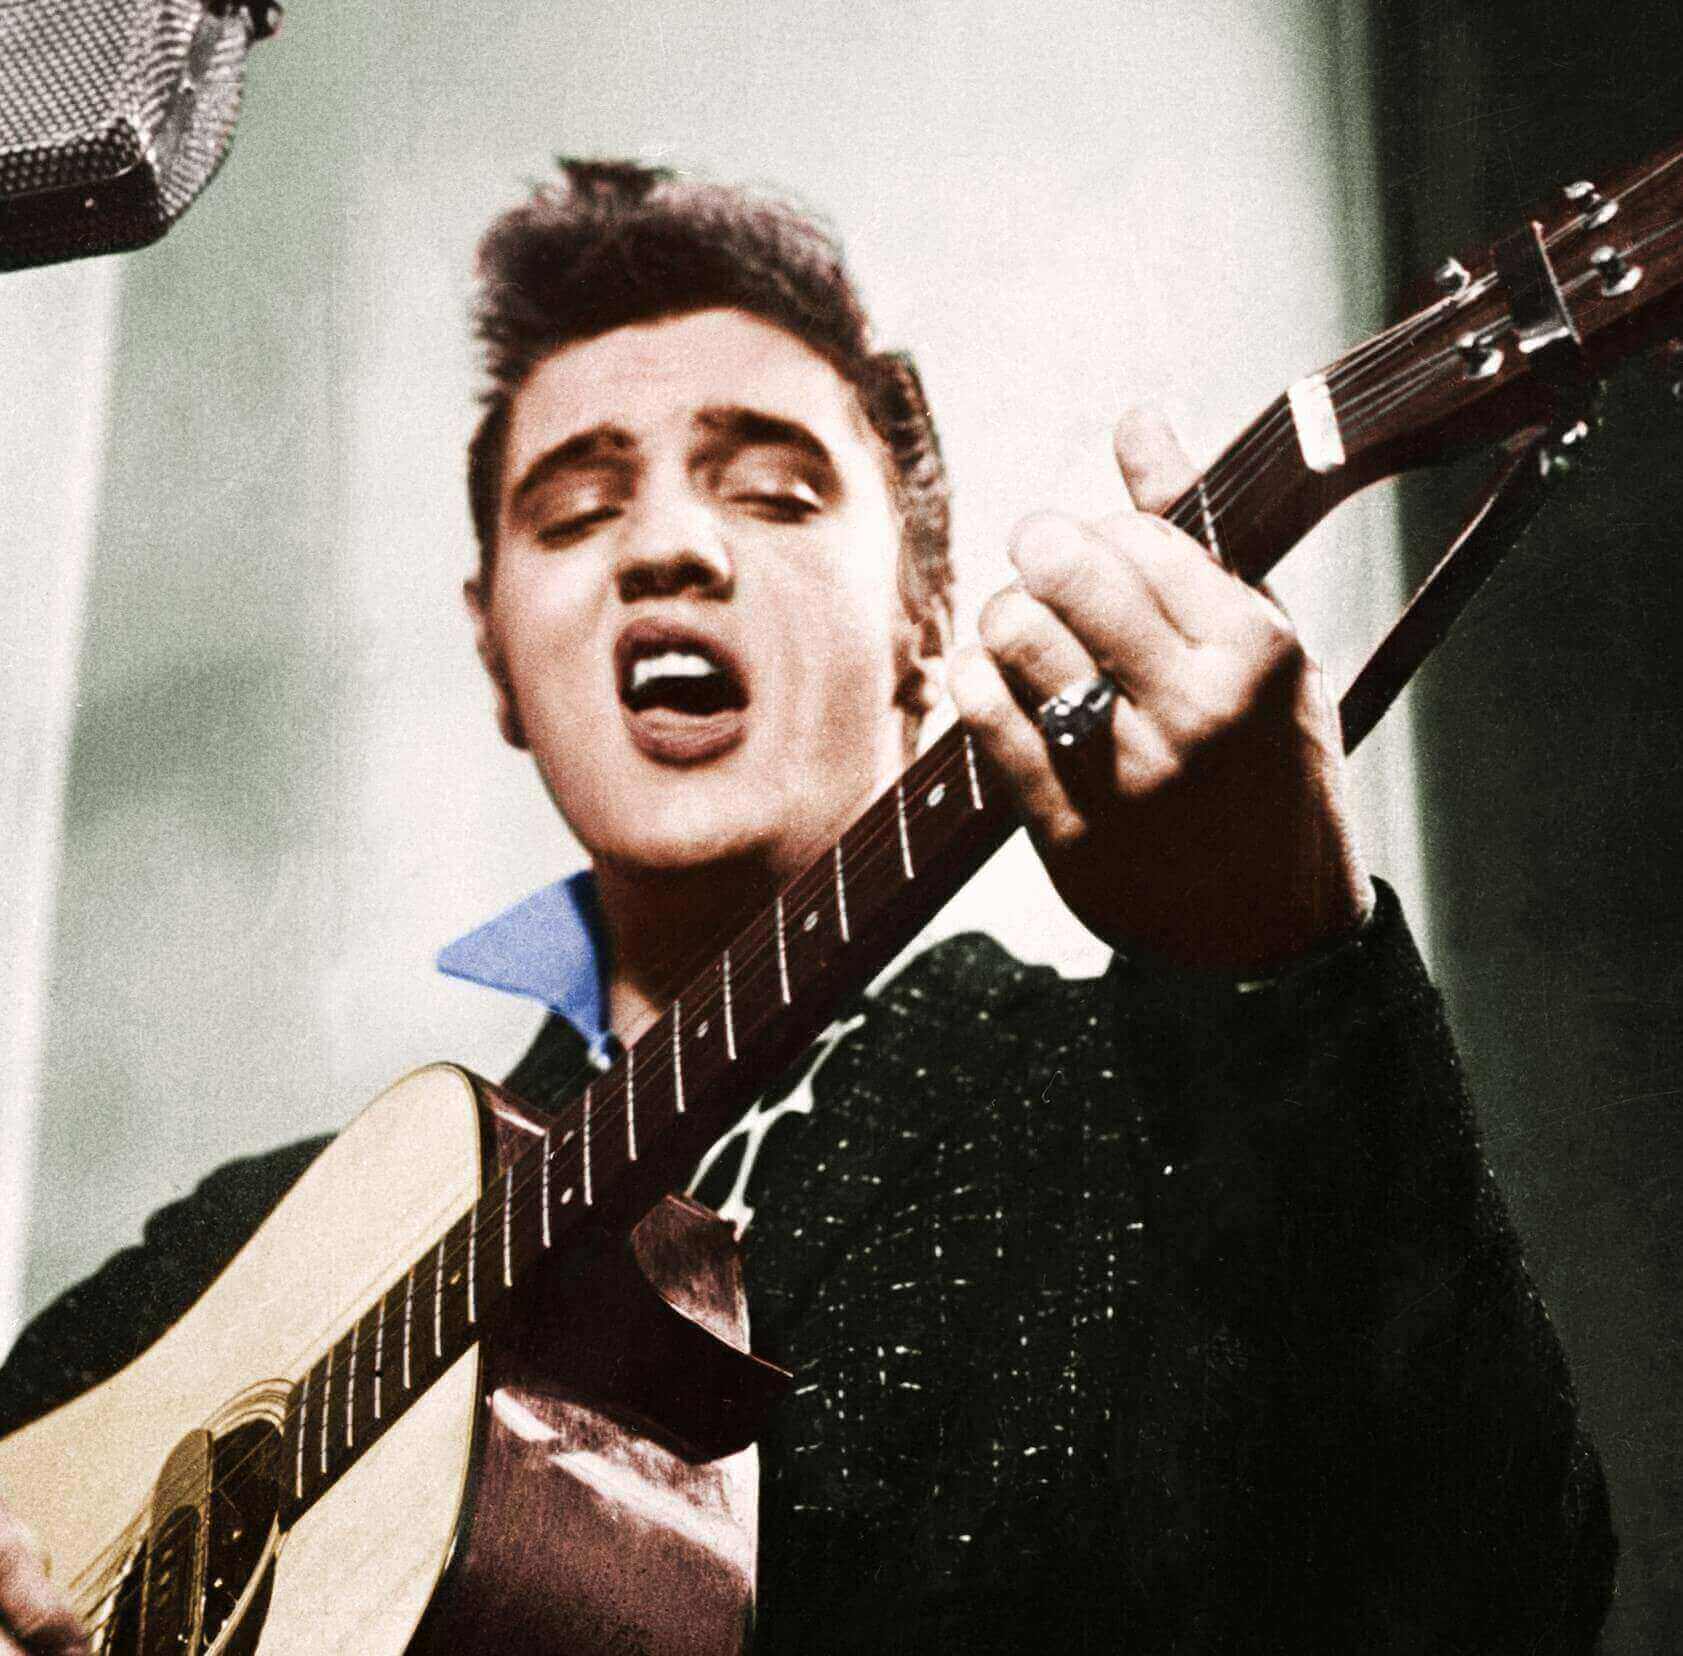 Elvis Presley singing and holding a guitar